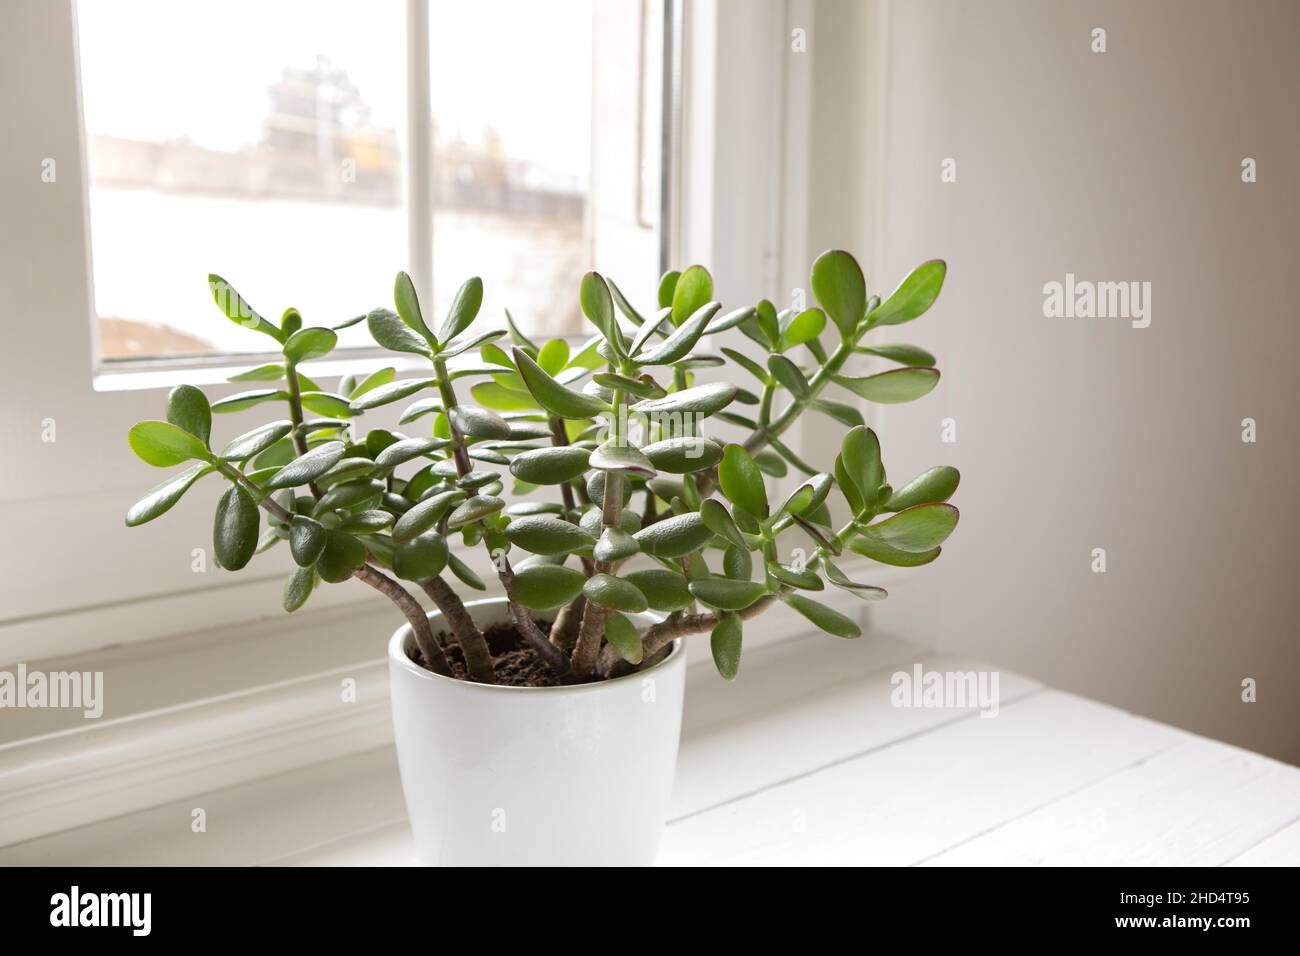 Crassula ovata, jade plant close-up. House plant in pot on the table by the window. Lush, fresh green leaves of houseplant. Succulent in home garden. Stock Photo